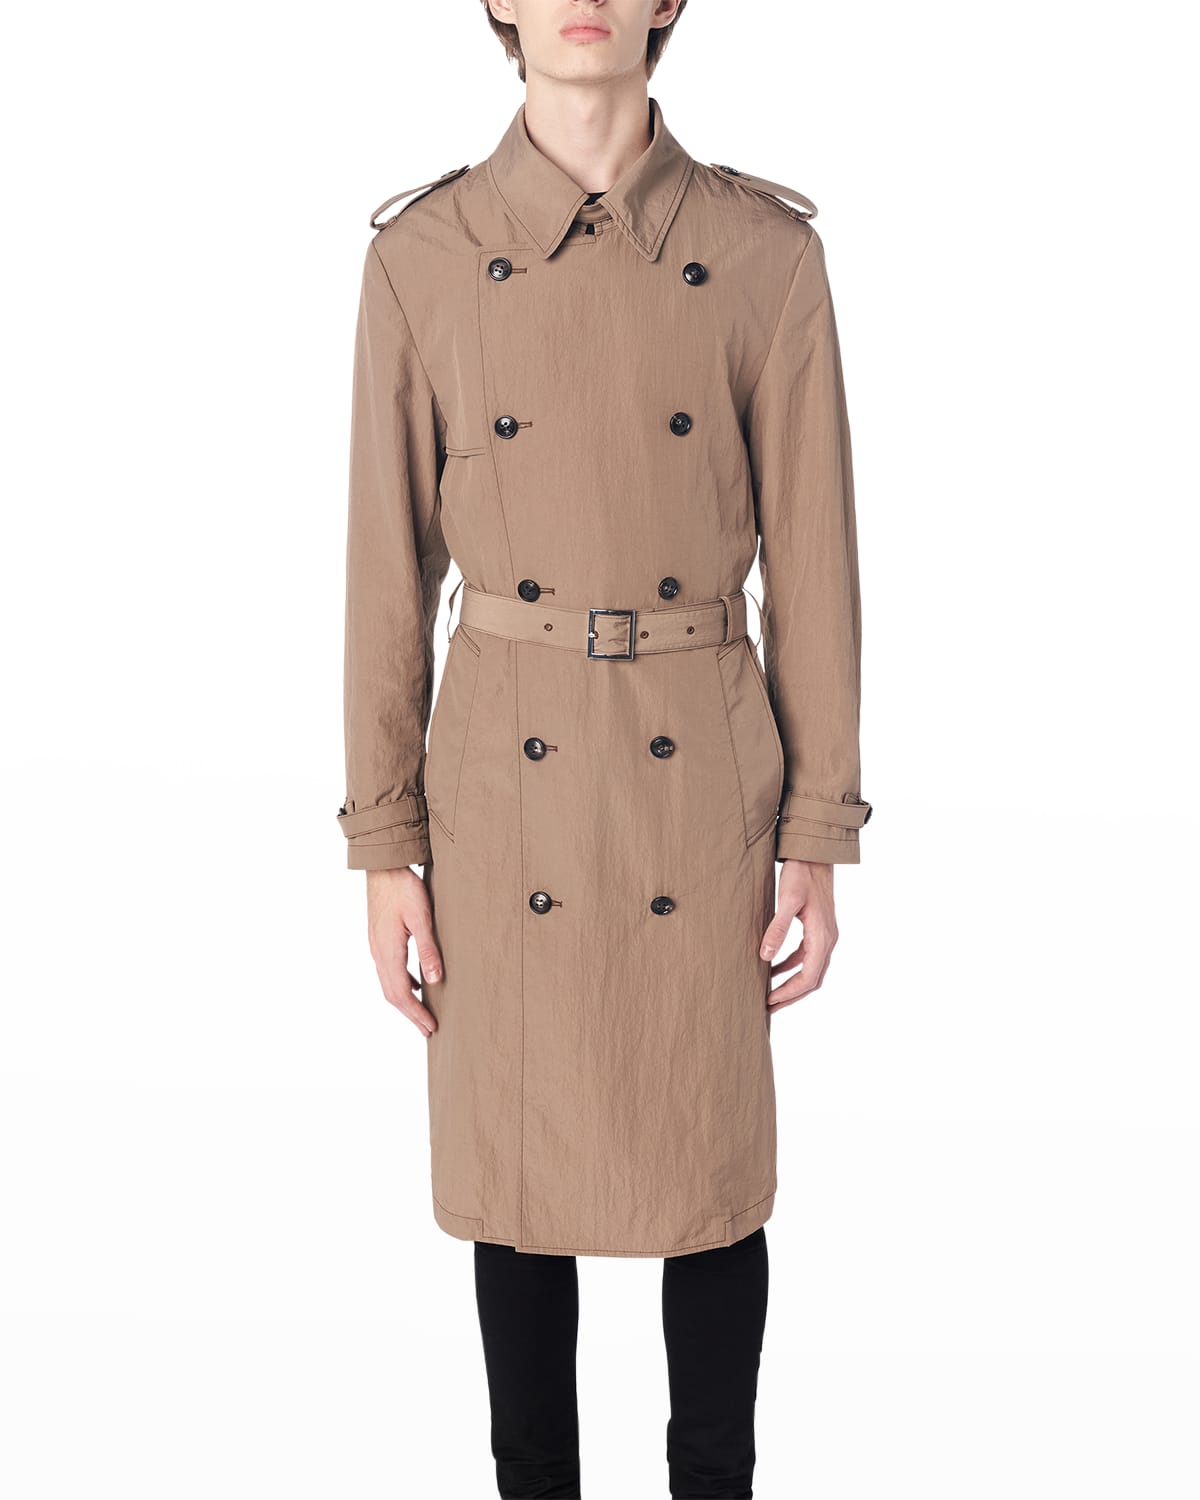 Men's Double-Breasted Trench Coat